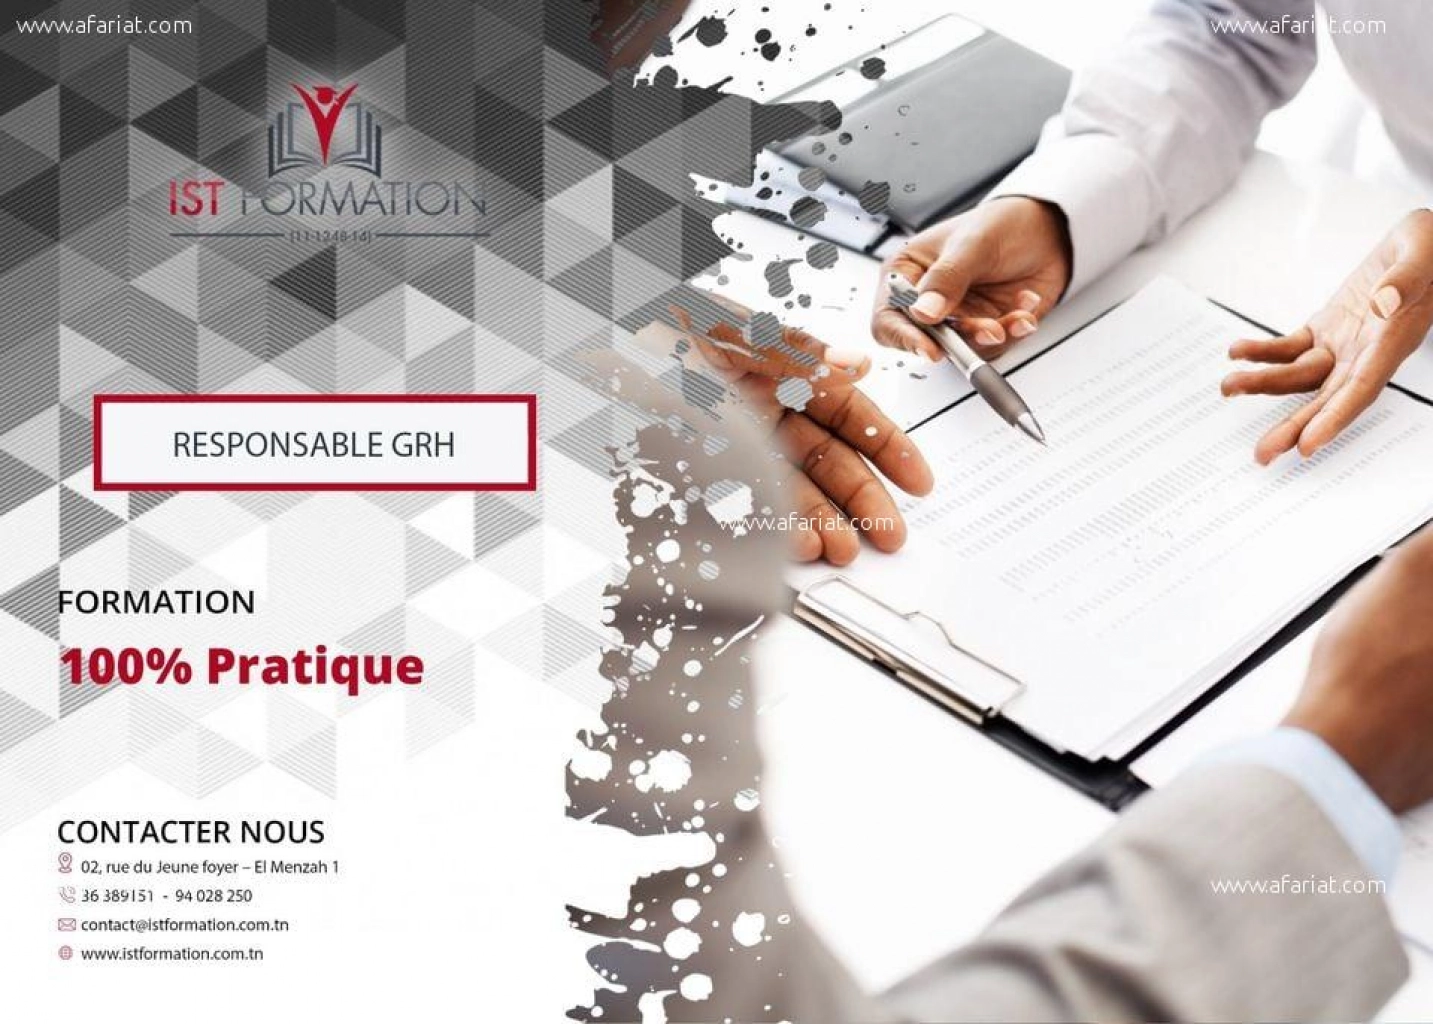 IST FORMATION : Responsable GRH